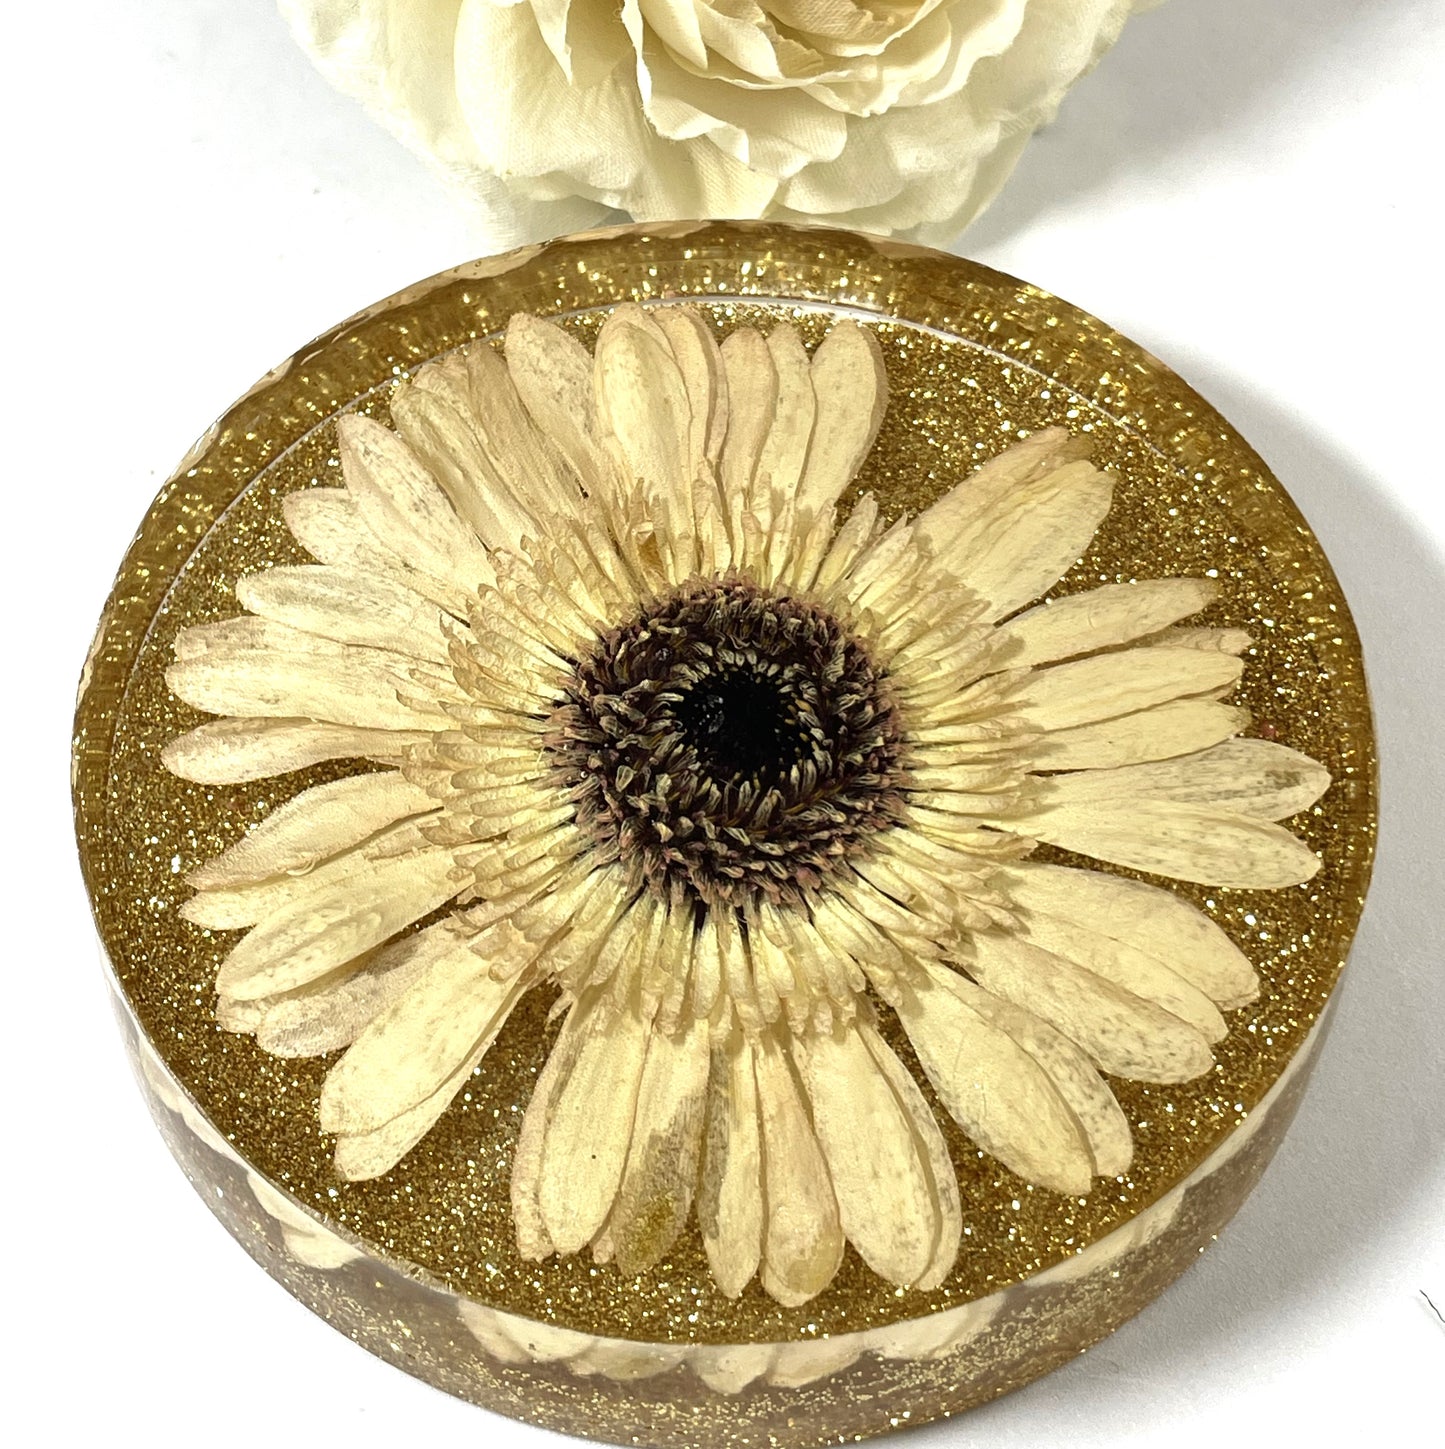 Coaster- Round Shaped with Yellow Gerbera Daisy and Gold Glitter